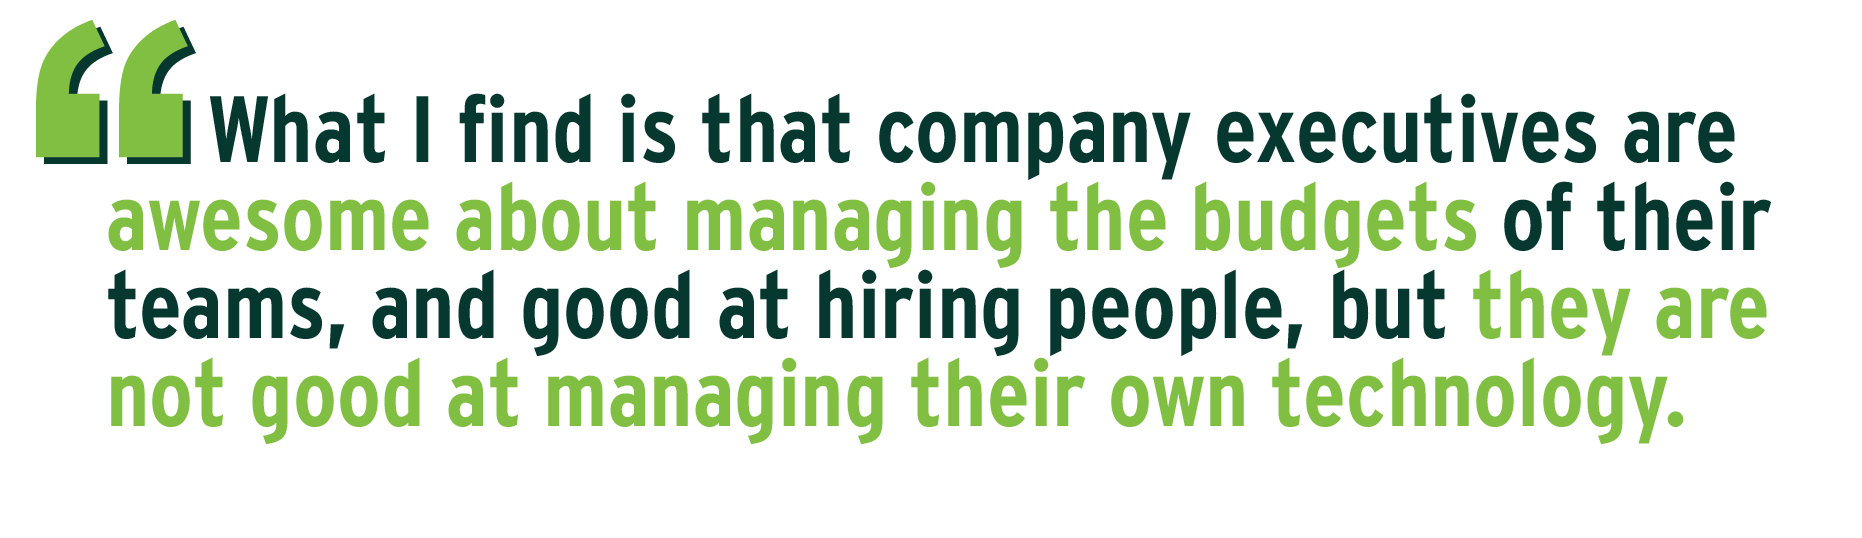 What I find is that company executives are awesome about managing the budgets of their teams, and good at hiring people, but they are not good at managing their own technology.